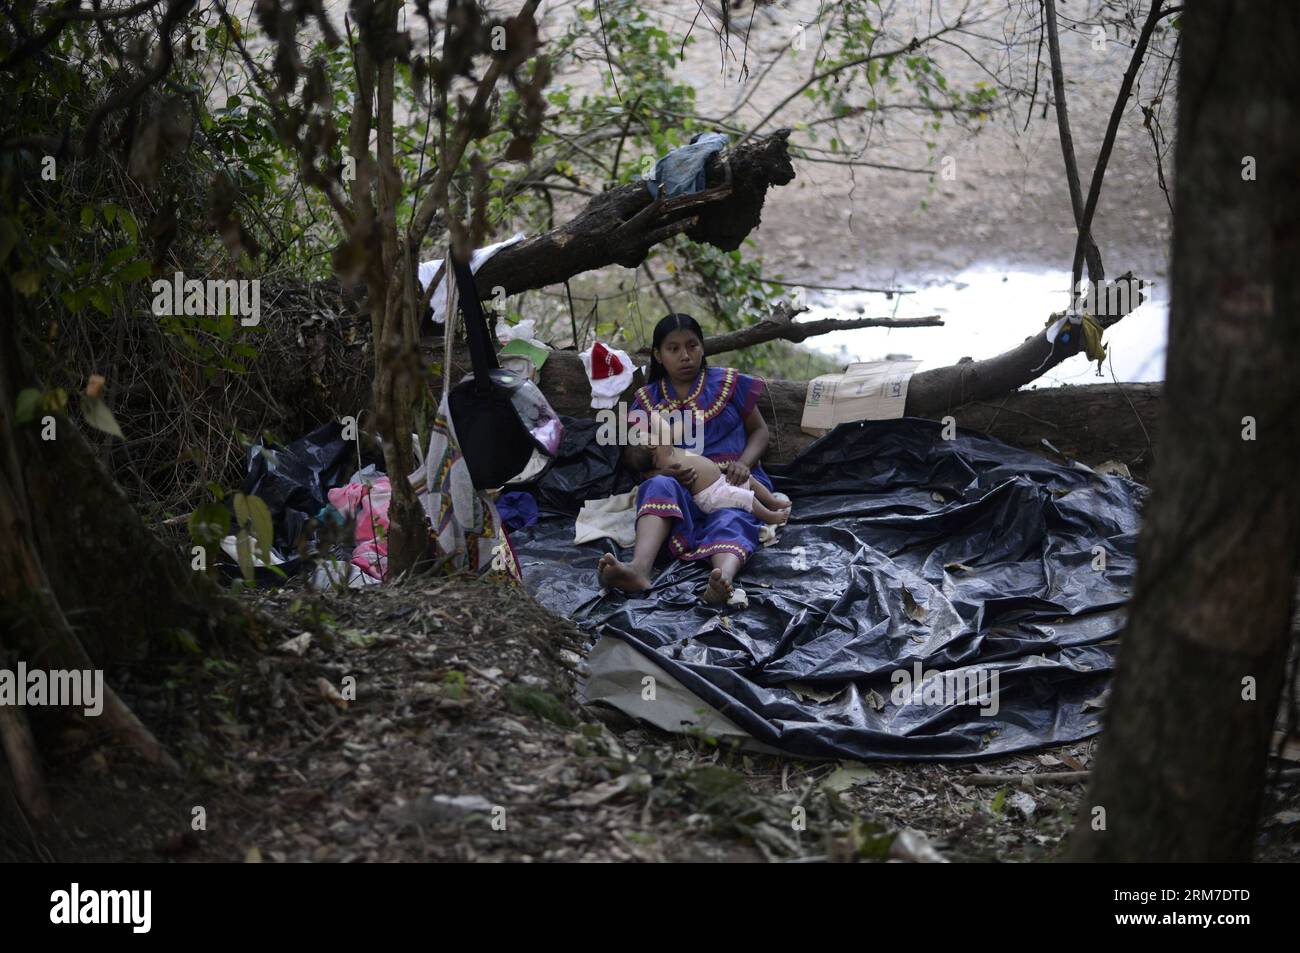 A woman of the Ngabe Bugle ethnic group feeds her baby in a camp near the Tabasara river bank in the Ngabe Bugle indigenous region, 450 km west of Panama City, capital of Panama, on Feb. 24, 2014. The Ngabe Bugle indigenous region is located in the western region of Panama, and covers an area of 6,968 square km, with 91 per cent of its population living in extreme poverty. Native leaders of the Ngabe Bugle region declared a national alert , because of the eviction notice issued by a company which is developing the hydro-electric project Barro Blanco . The project will use the water from Tabasa Stock Photo